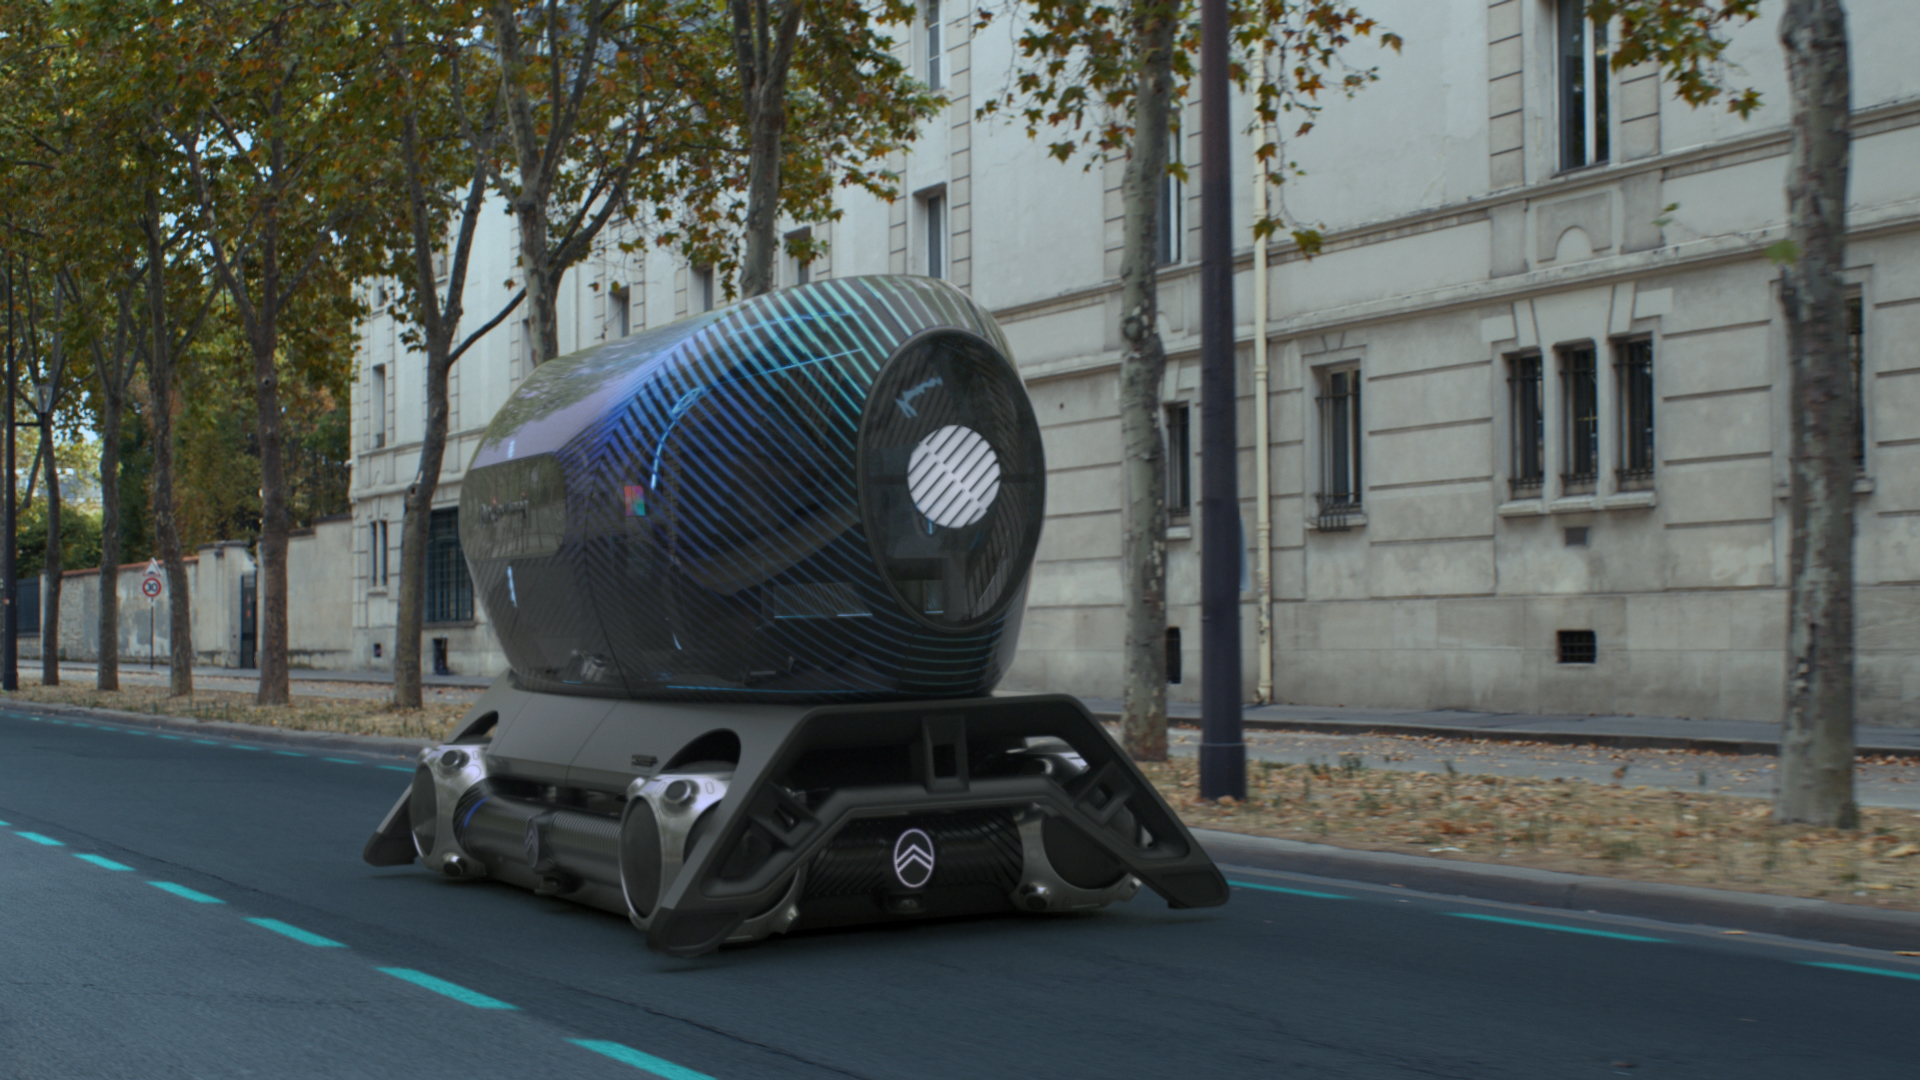 Citroën Skate modular EV concept shows a very stylish future for urban mobility and cargoCitroën Skate modular EV concept shows a very stylish future for urban mobility and cargo